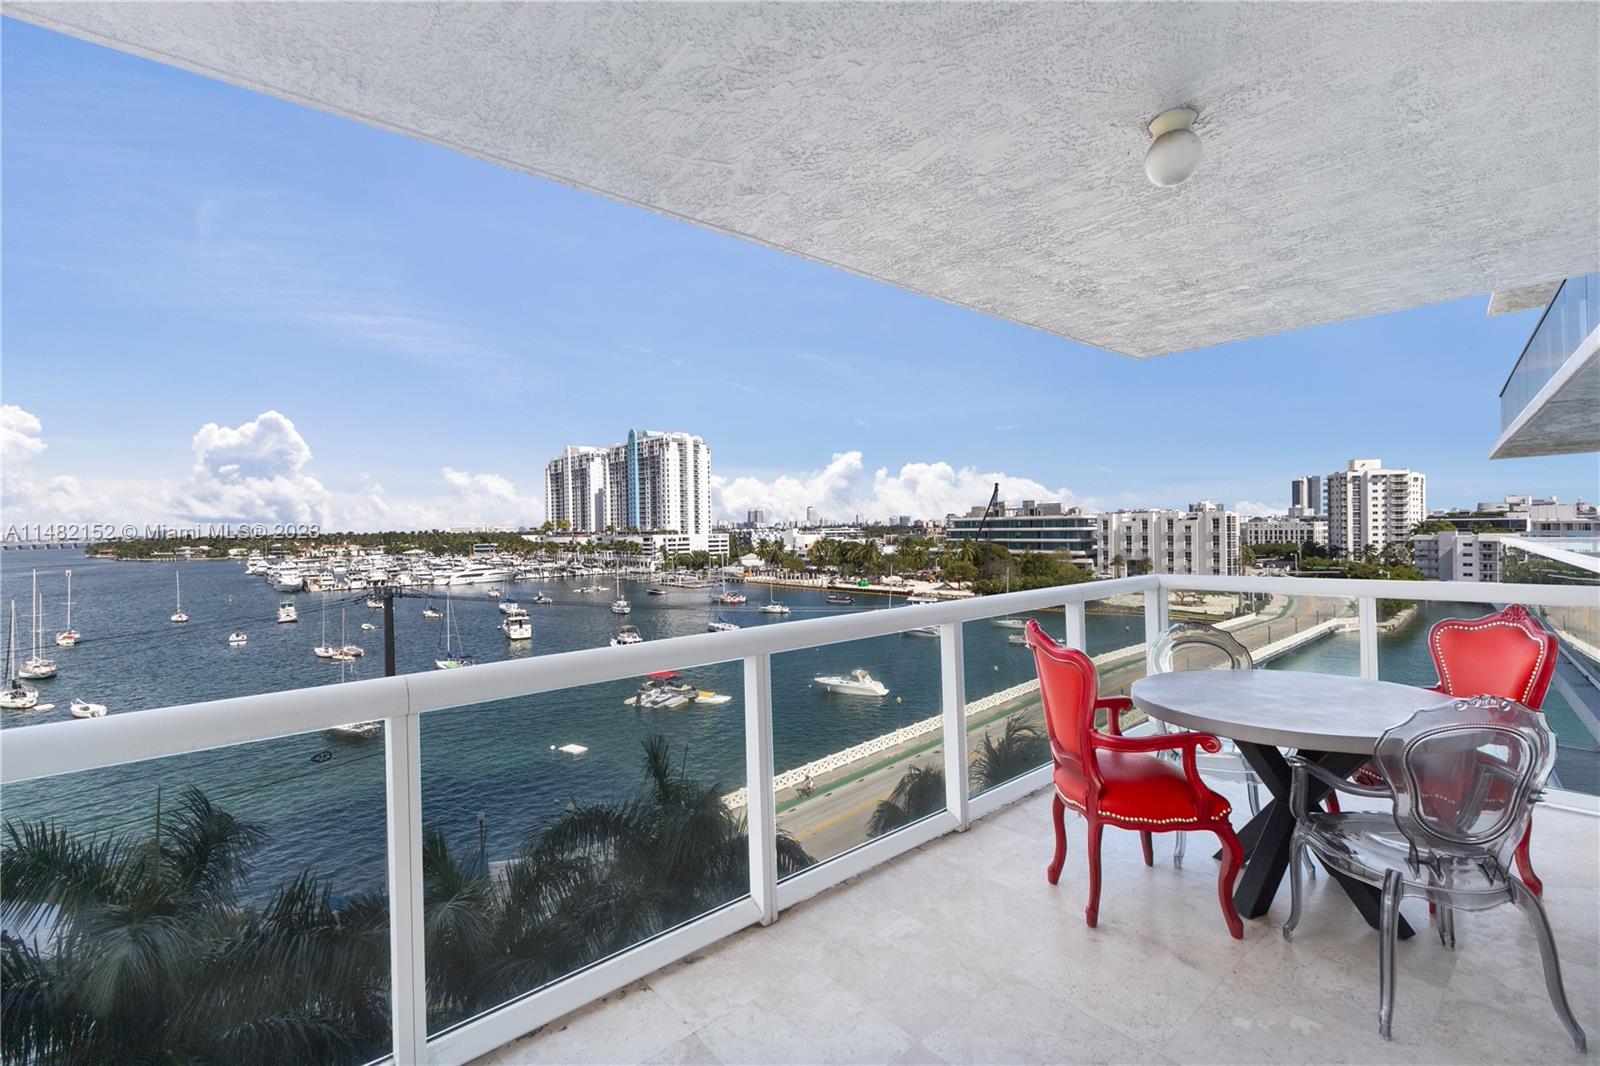 Just Listed:  the most desirable 03 line with direct bay views from every room.   This chic condo delivers premium views in the most upscale and coveted location on the Venetian Islands.  Prestigious waterfront location with a resort vibe:  bayfront pool, spa, summer kitchen, cabanas, gym and tennis court.   High ceilings, marble floors, custom closets, updated lighting, spacious rooms plus two oversized balconies welcome you home.  Walk to Sunset Harbour restaurants, the Standard, Lincoln Road plus an easy commute to Brickell + the airports.  Private and secure building with just 134 units.  This stylish Miami Beach lifestyle is available for immediate occupancy just in time for season.   Easy to show, use ShowAssist